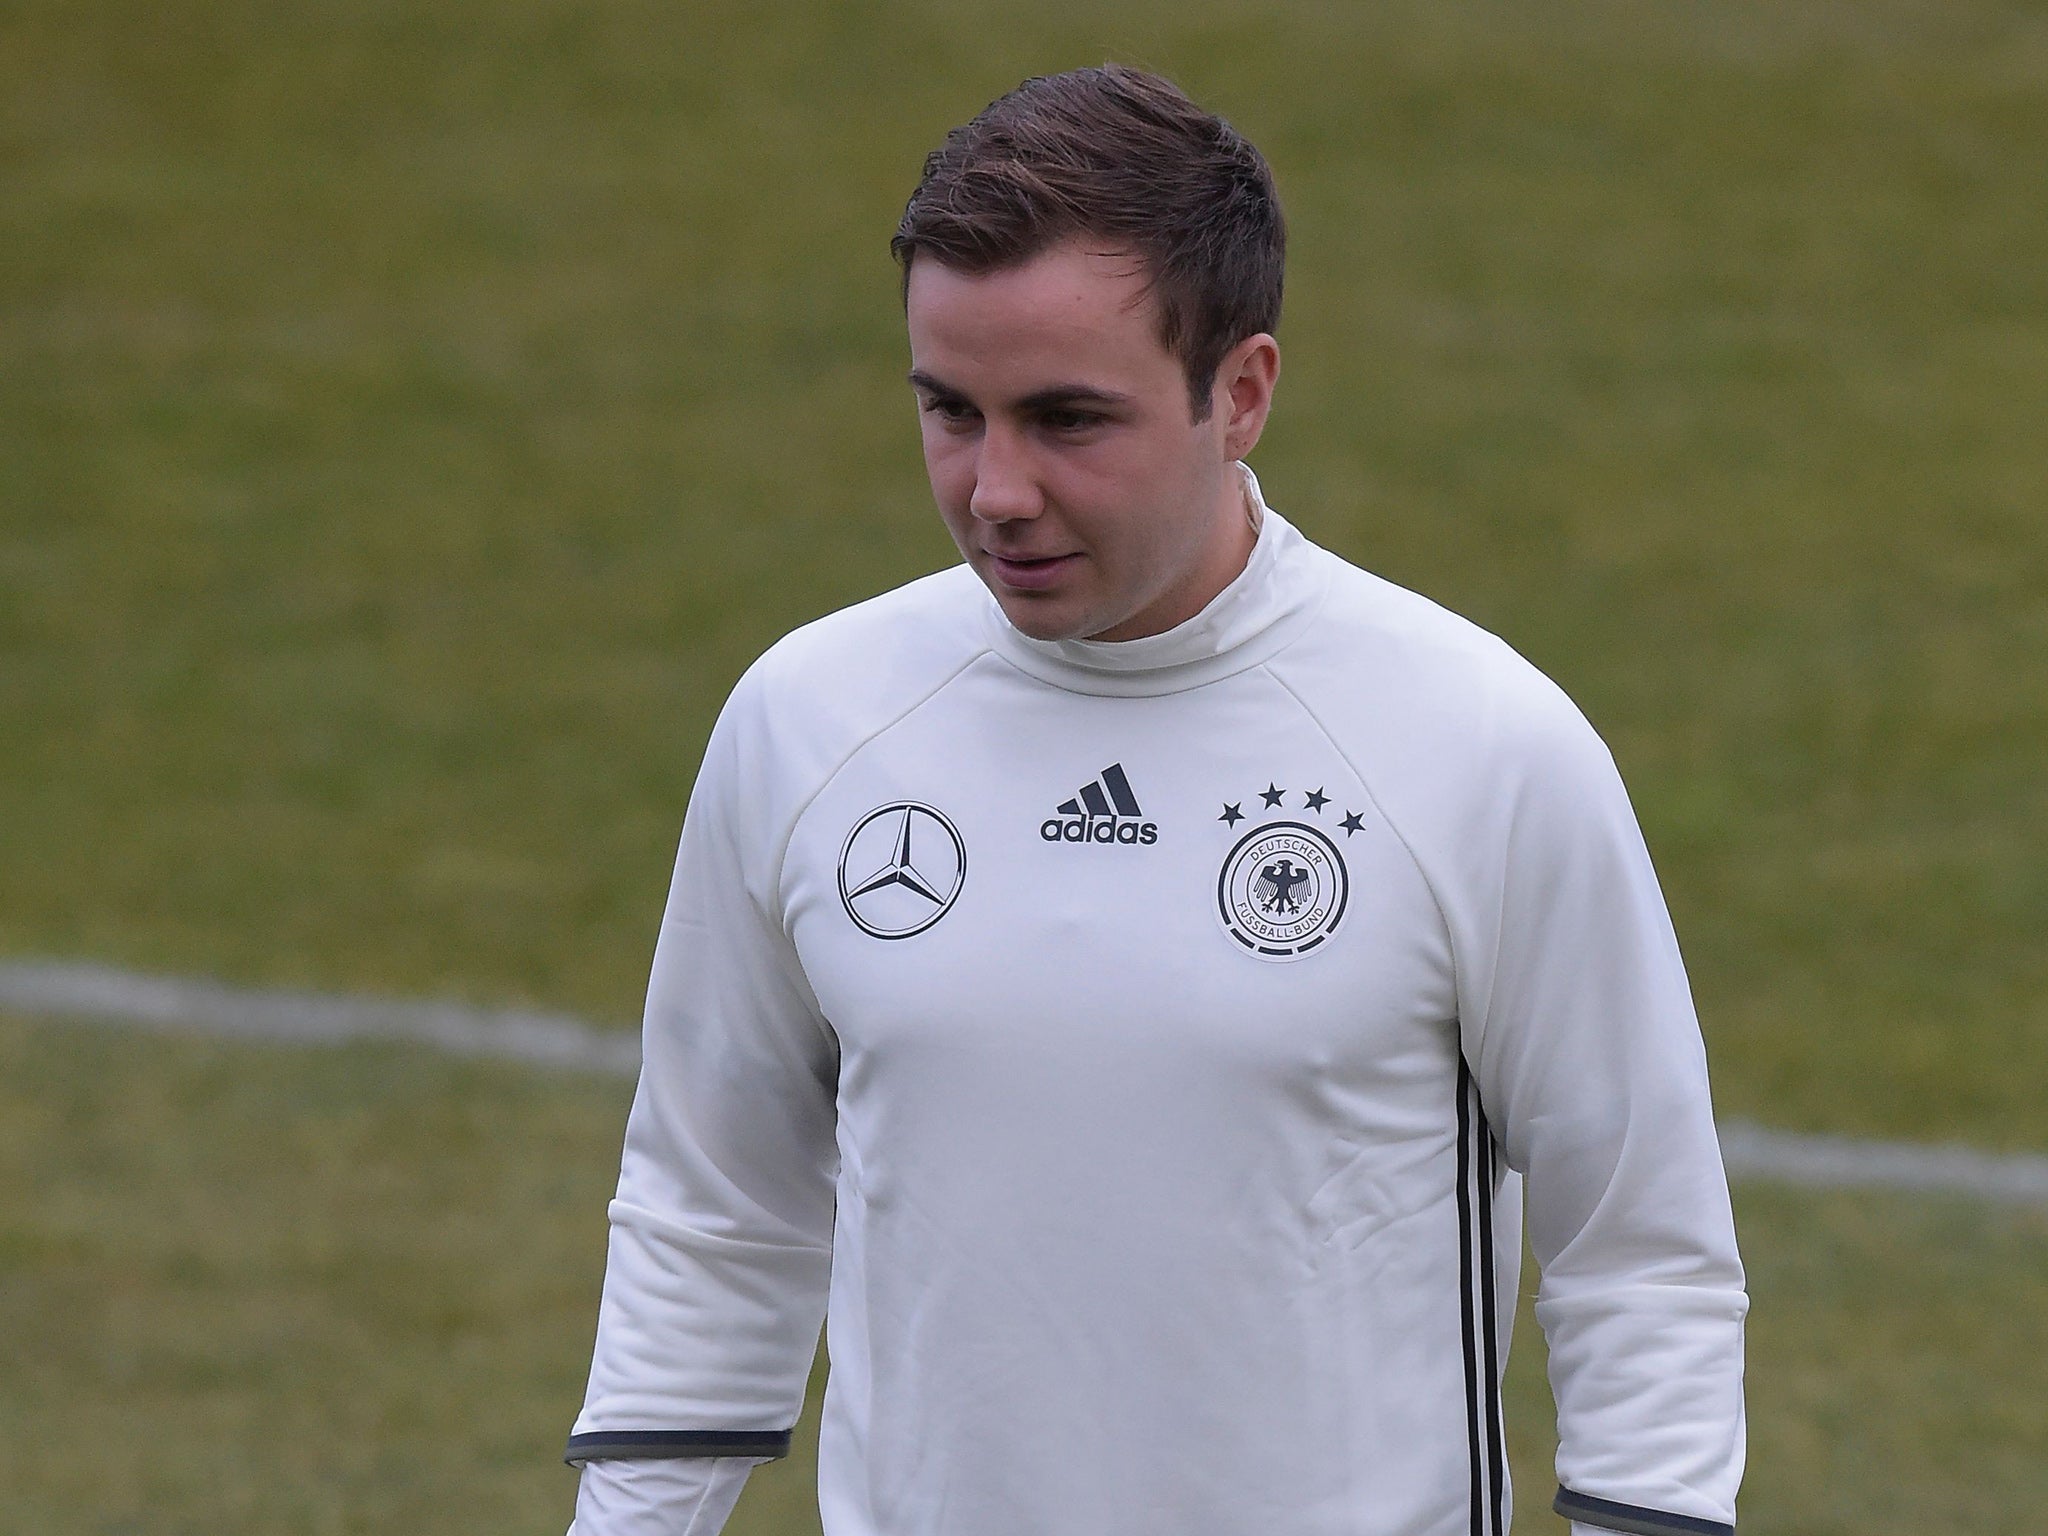 Mario Gotze during a training session with Germany